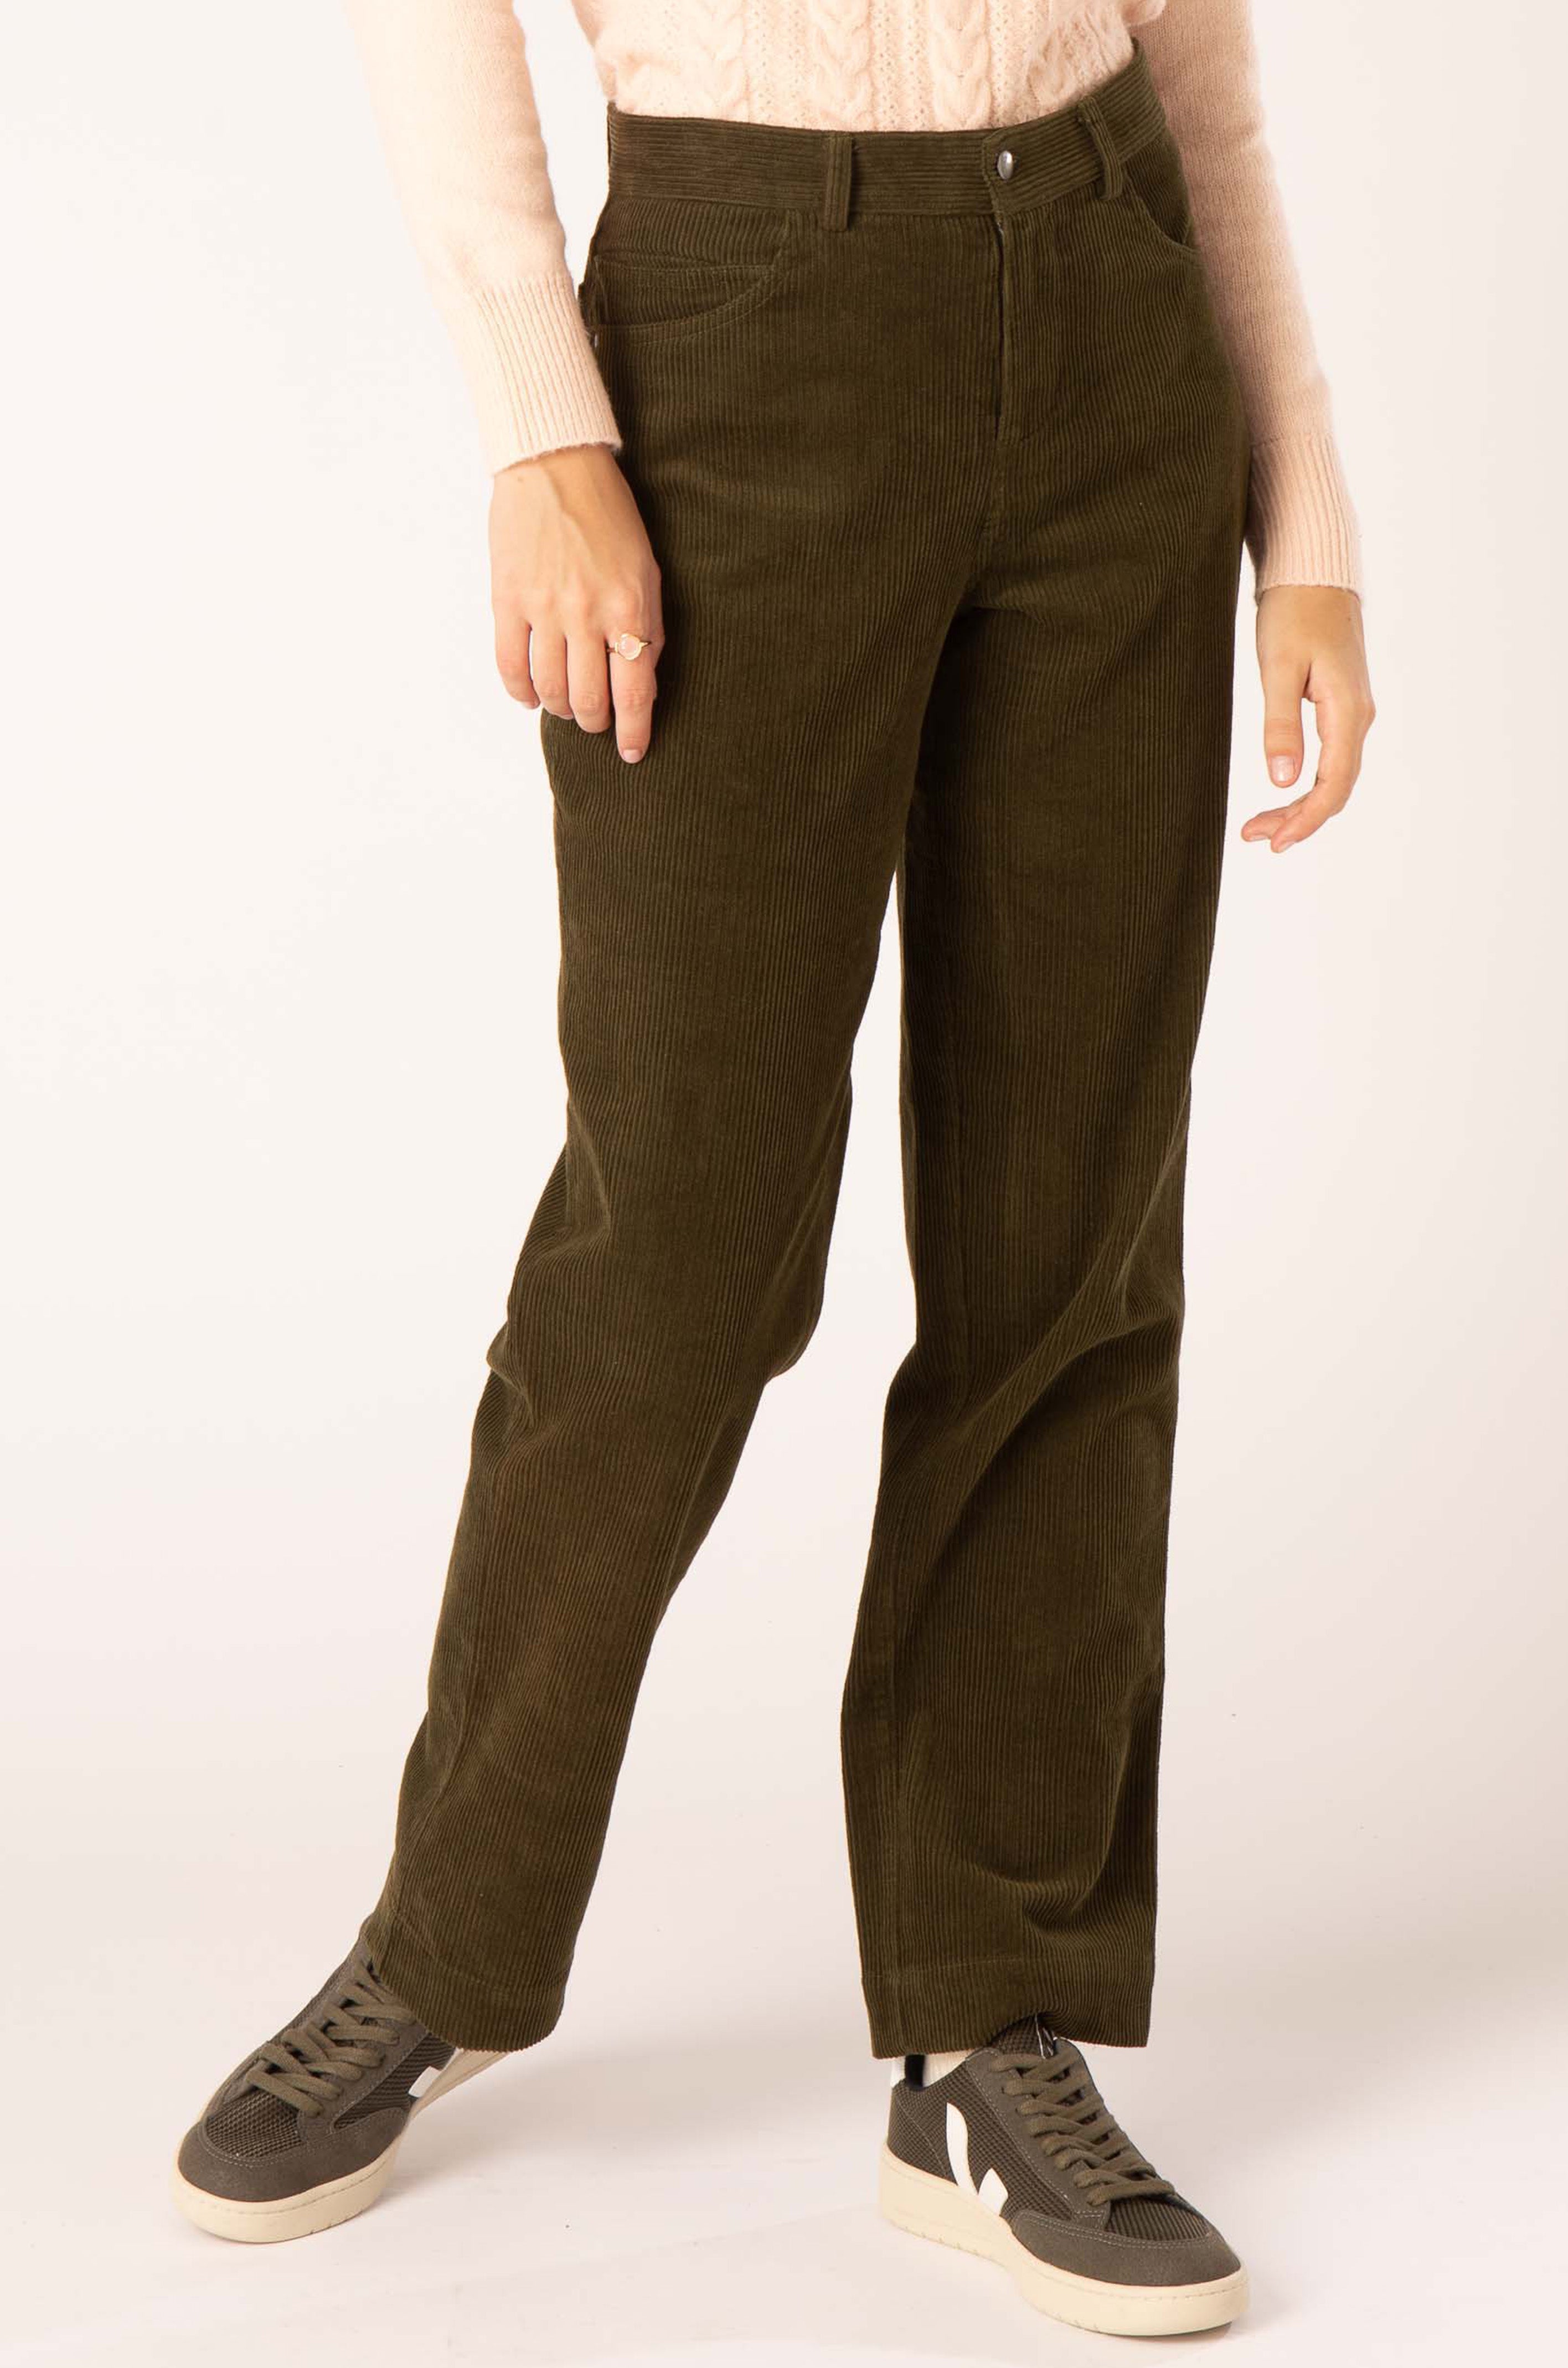 Cord Trouser in Military Olive, Military Olive / 16